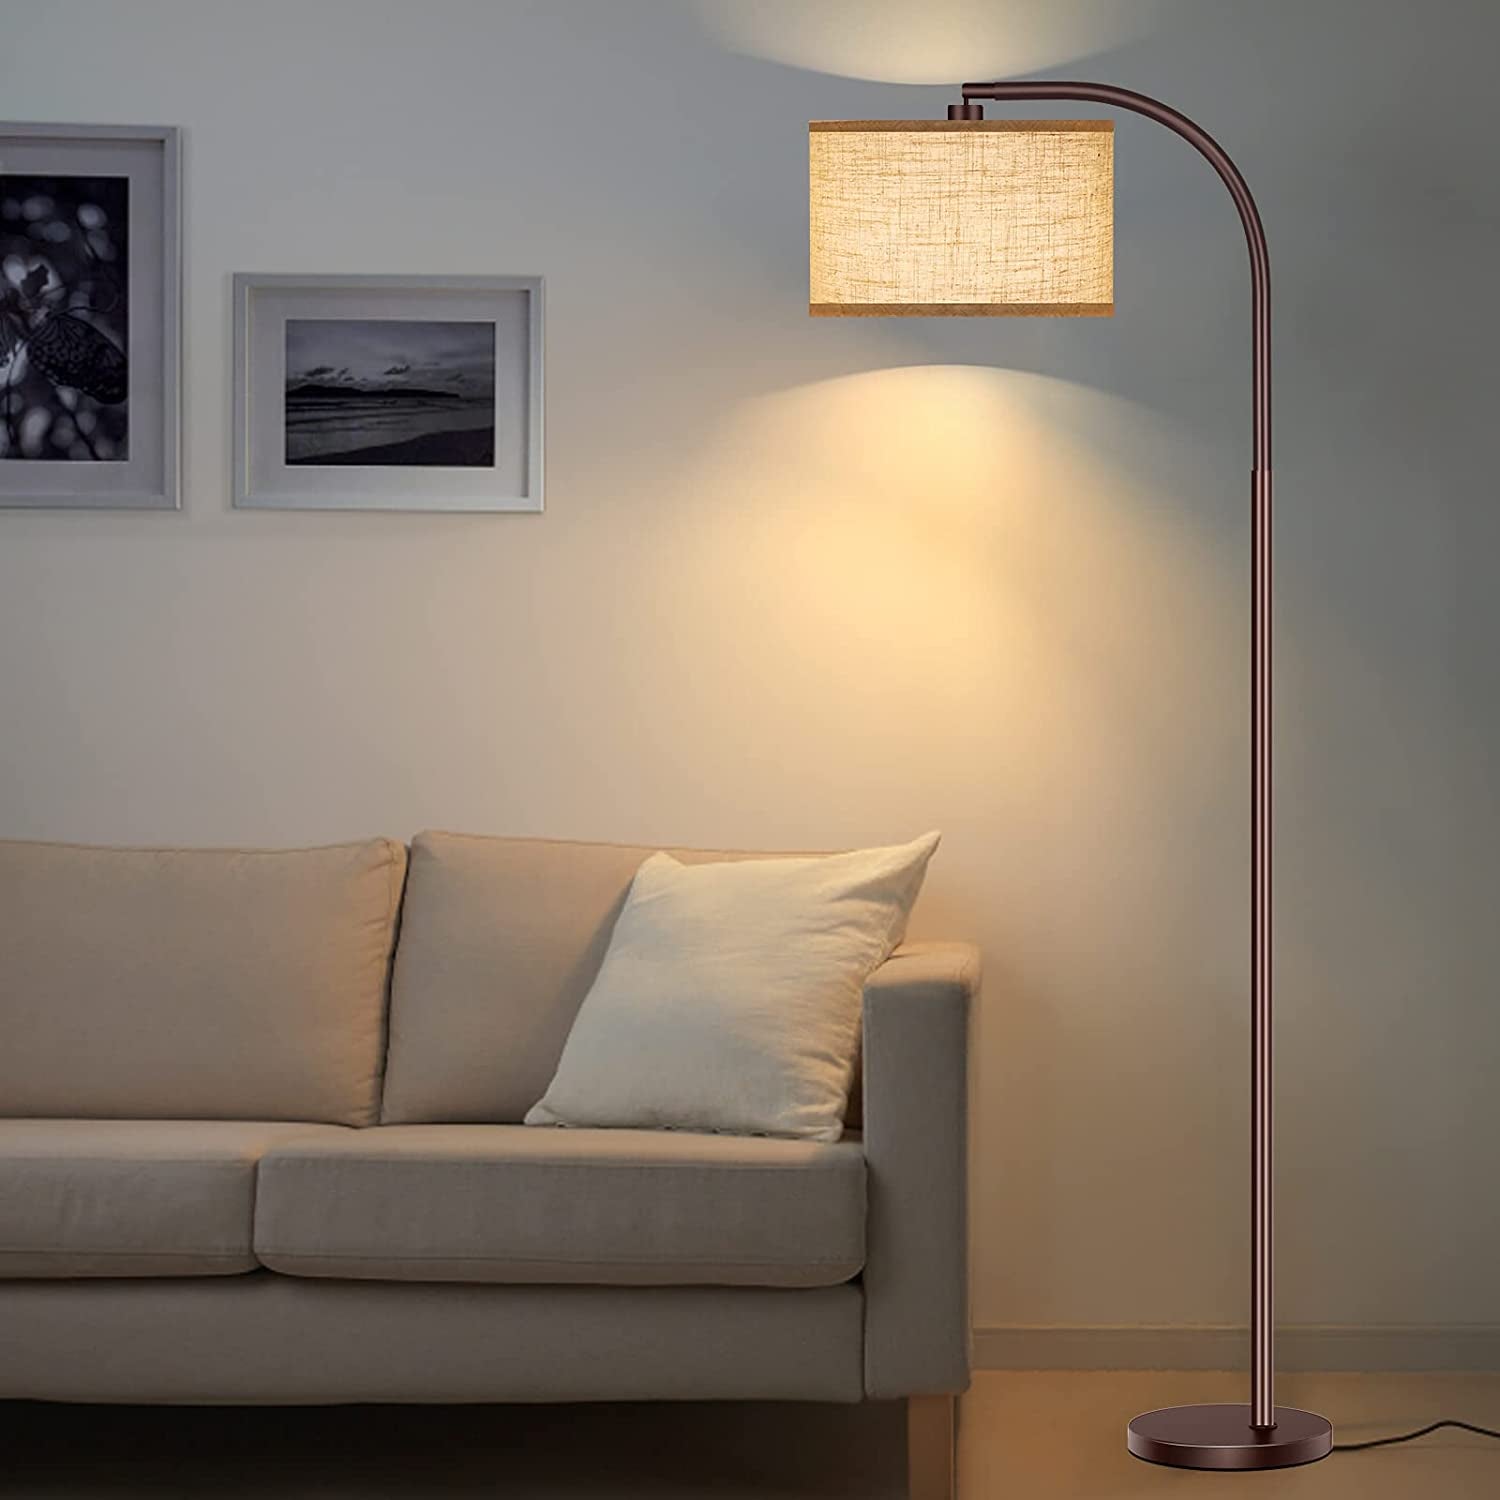 Floor Lamp for Living Room, Oil-Rubbed Bronze LED Standing Lamp with 2 Lamp Shades (Beige/White), Classic Tall Reading Pole Lamp with LED Bulb, Modern Adjustable Floor Lamp for Bedroom Study